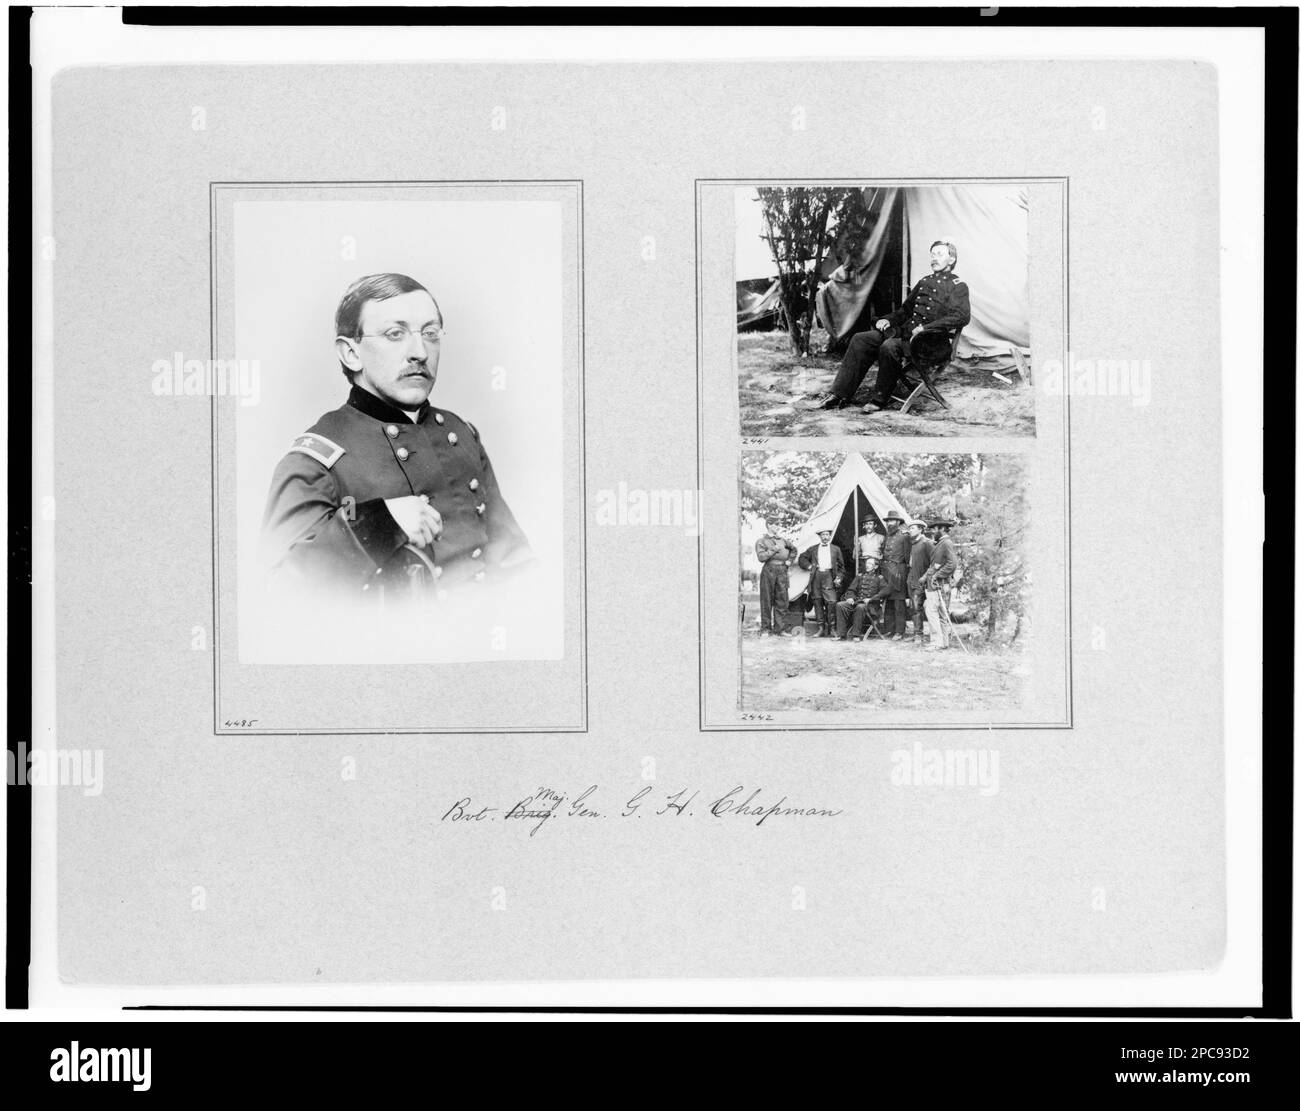 Bvt. Maj. General G. H. Chapman. No. 4485, Title from item, Gift; Col. Godwin Ordway; 1948. Chapman, George H, 1832-1882, Military service, United States, History, Civil War, 1861-1865. Stock Photo